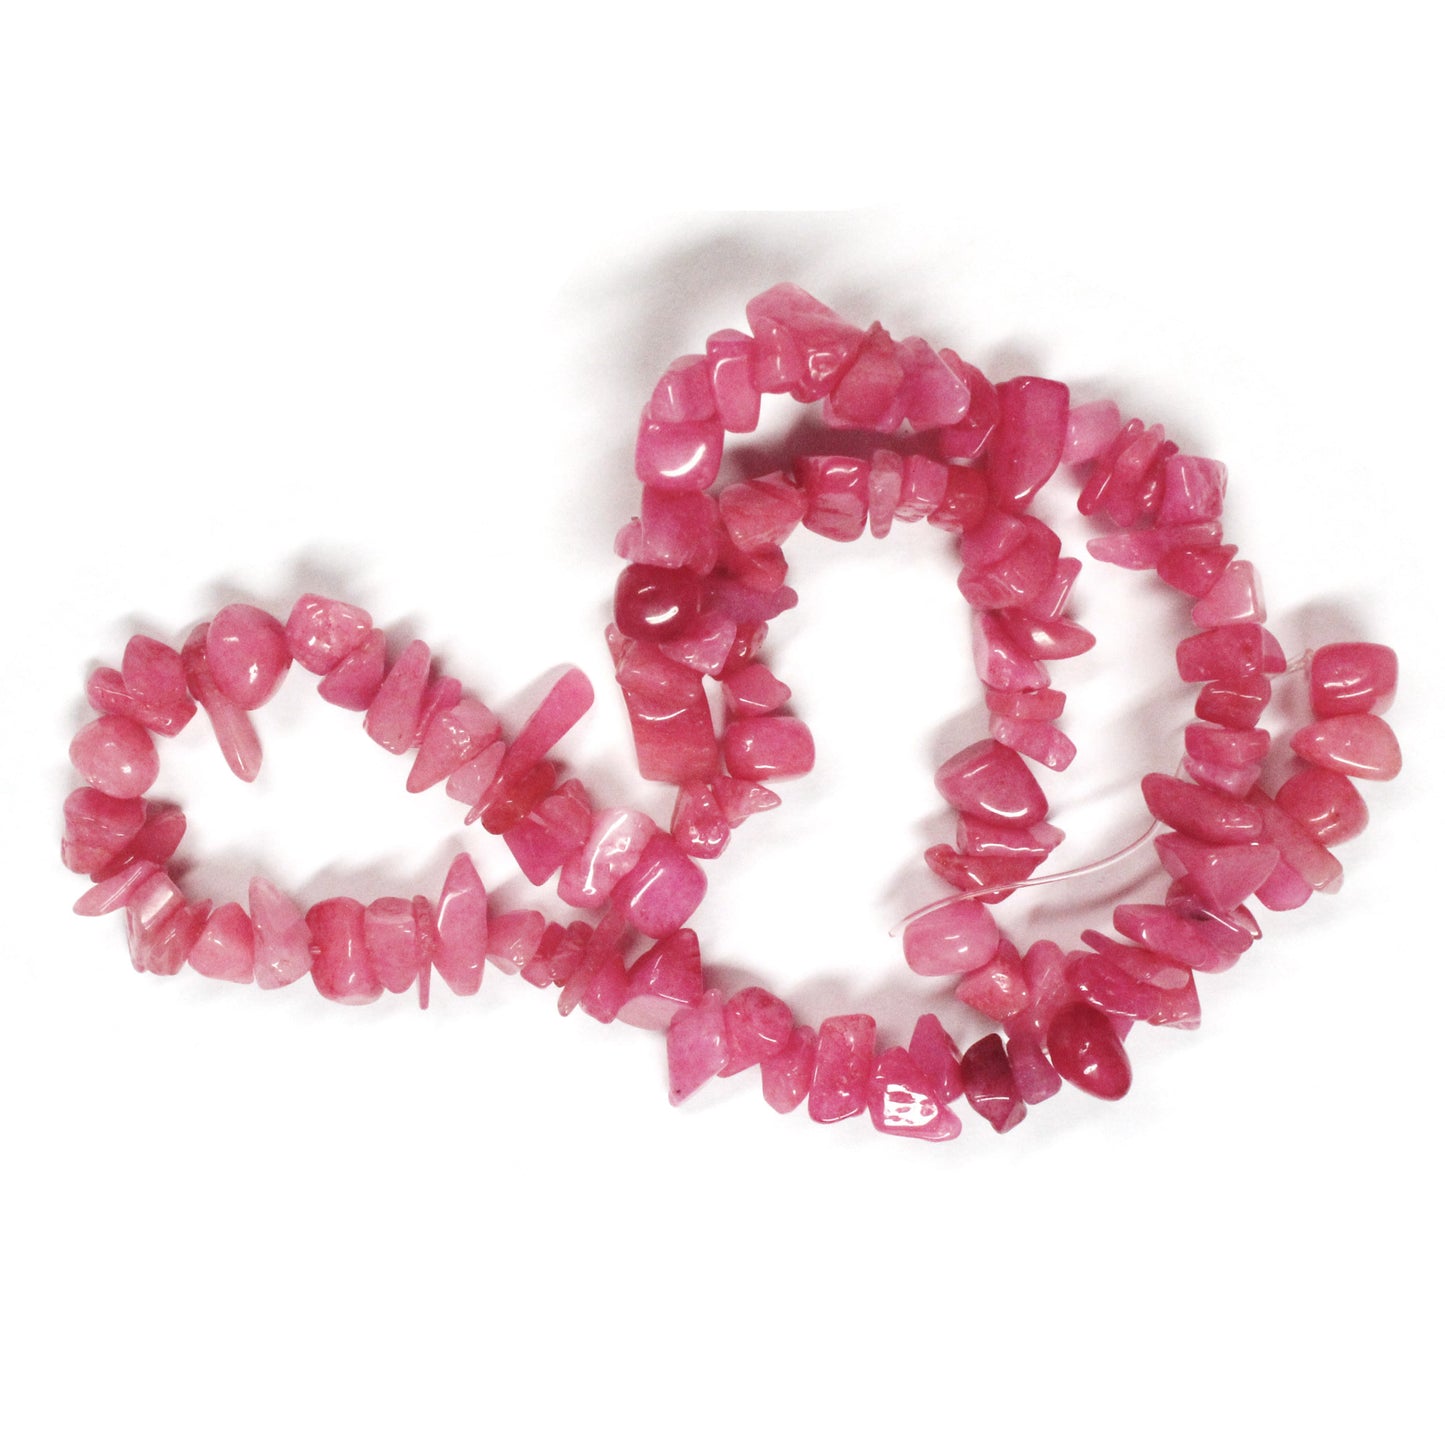 Fuchsia Candy Jade Chip Beads / 16 Inch strand / 5-12mm chips / natural opaque dyed stone